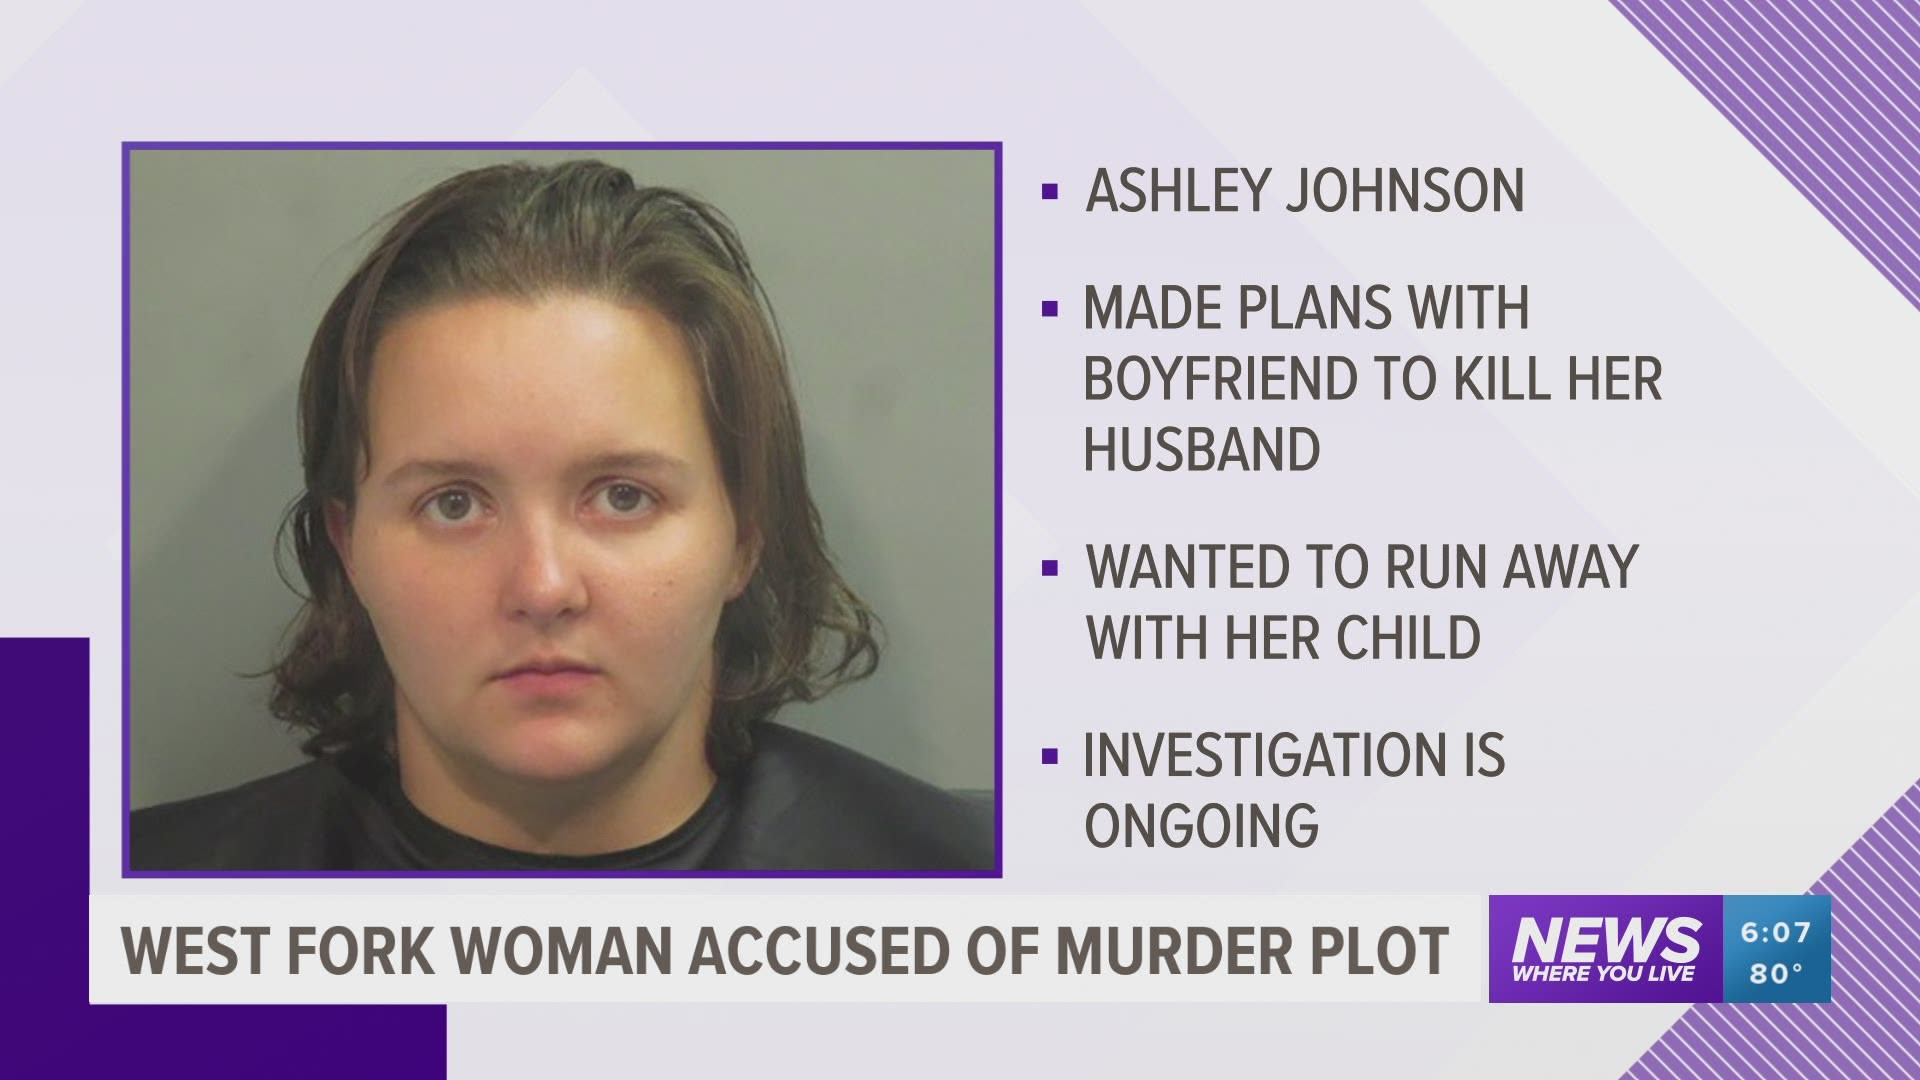 28-year-old Ashley Johnson was arrested on Aug. 2 in connection with a plot to kill her husband. https://bit.ly/2DAb9VT